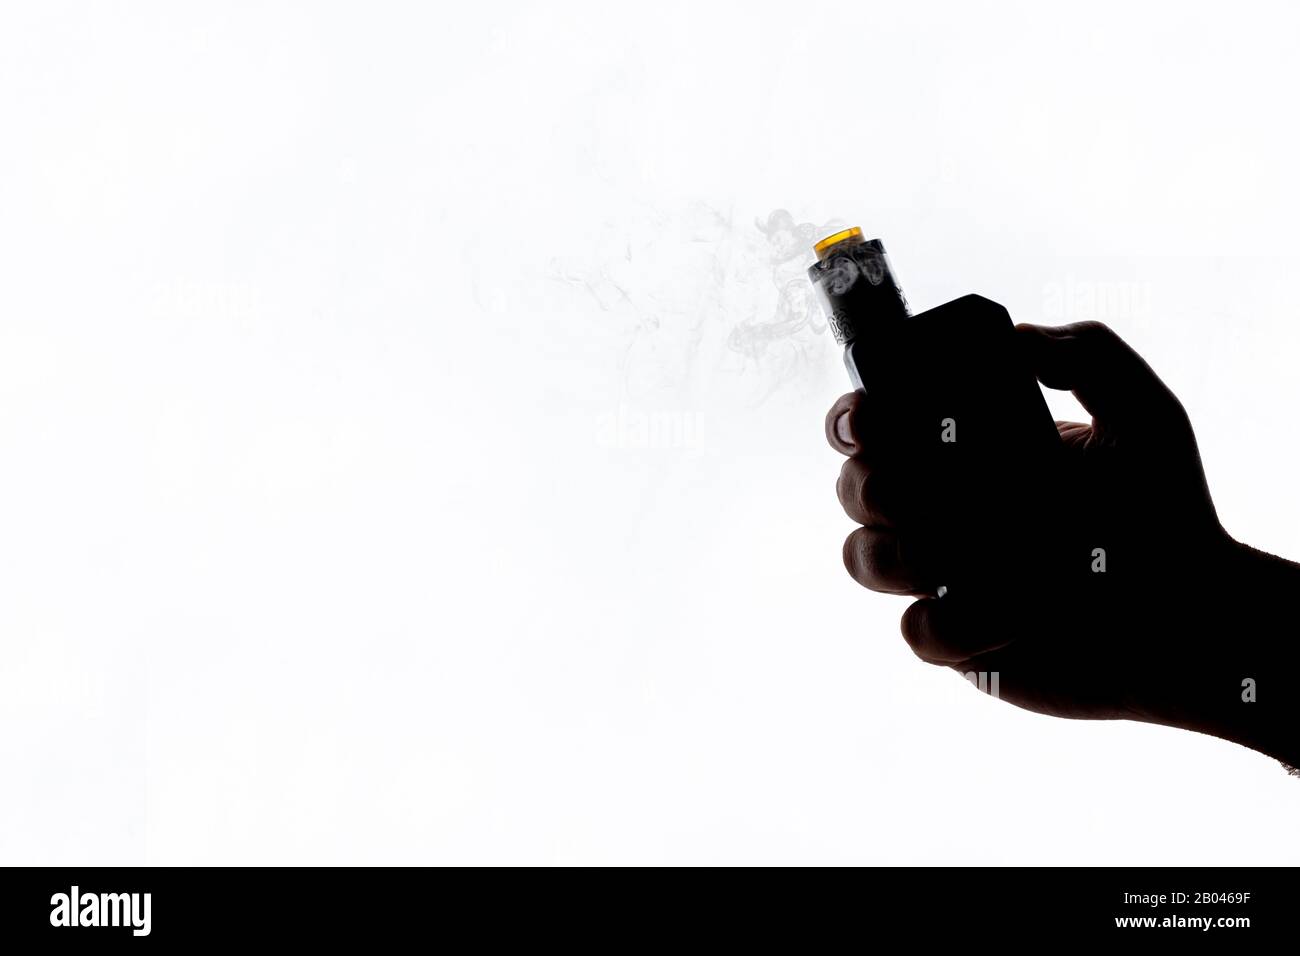 Vape mod e-cig for help quit smoking tobacco with rdta on white background silhouette shape close up Stock Photo